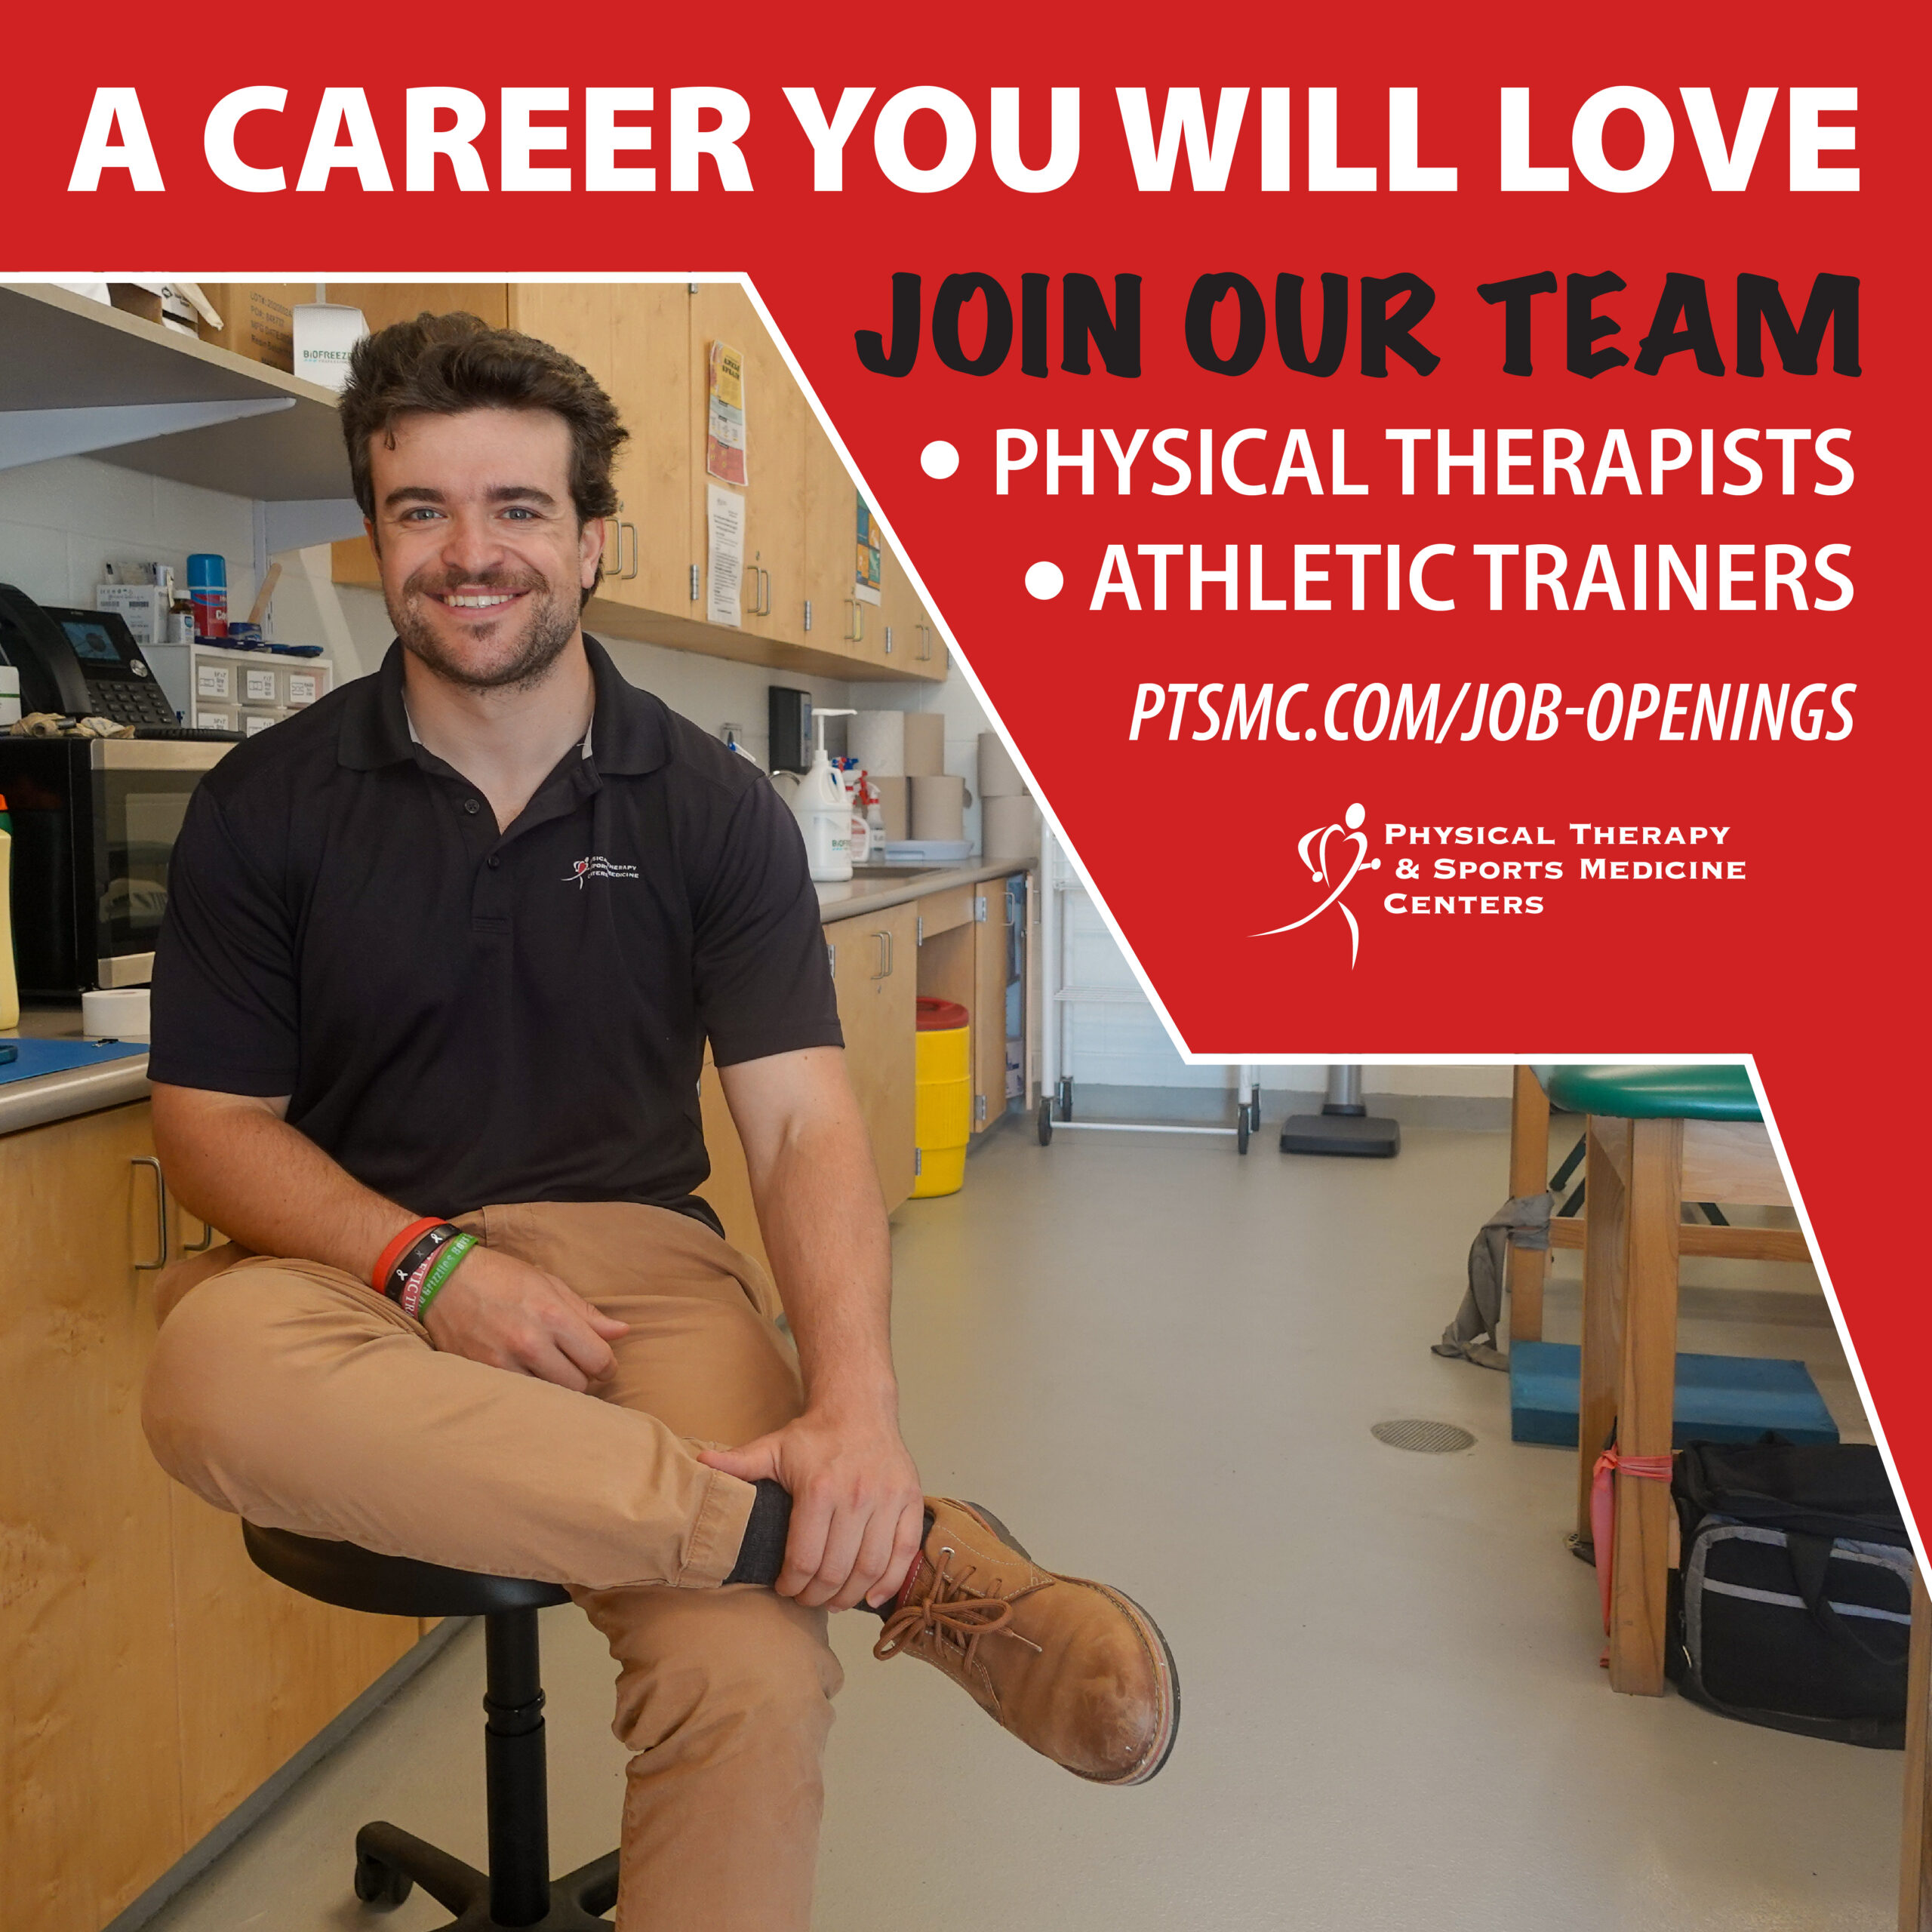 PTSMC is hiring graphic with a smiling male athletic trainer